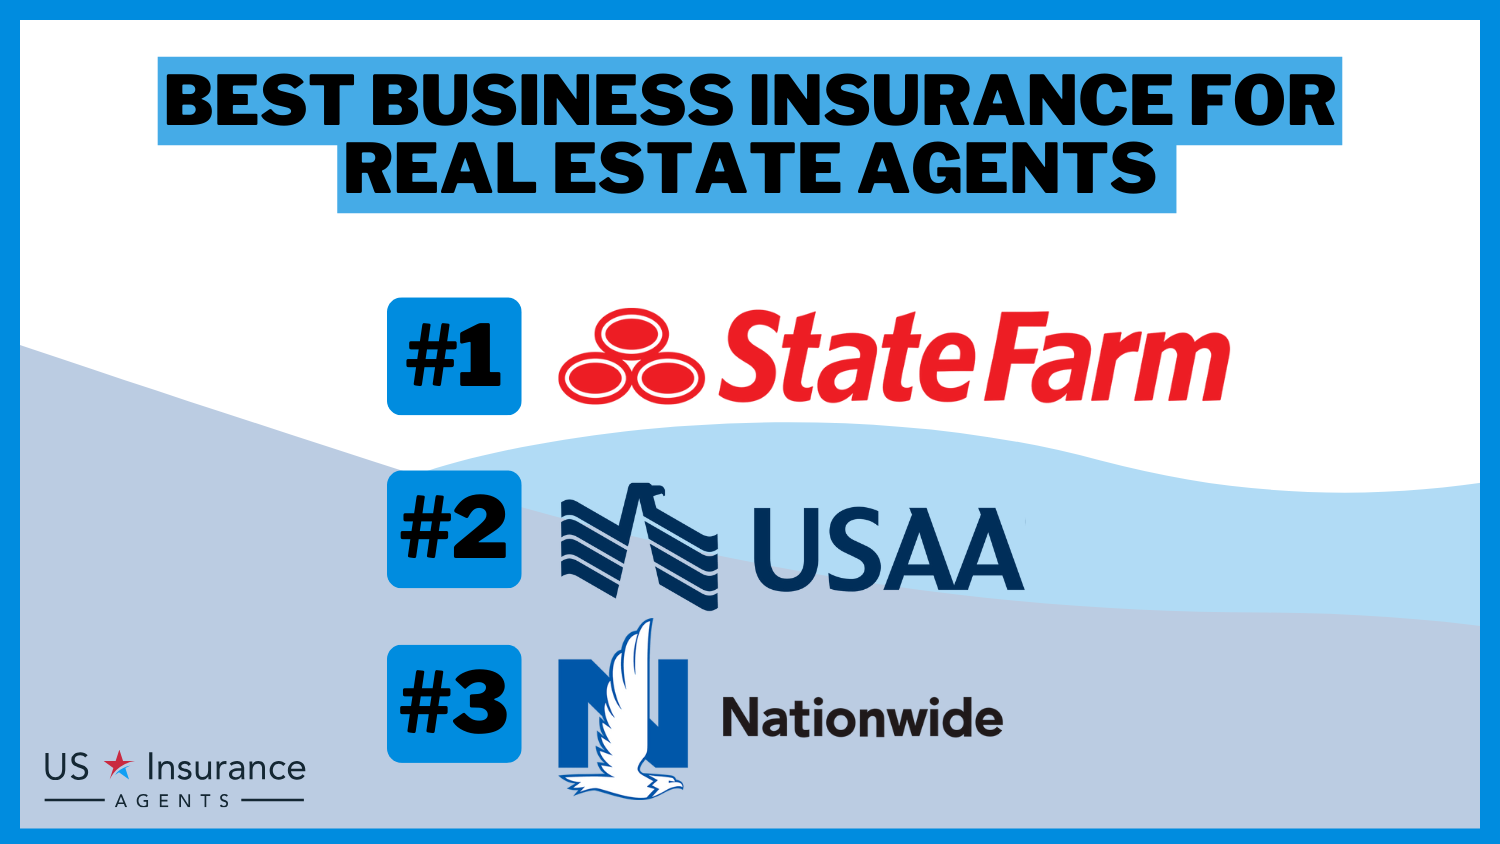 3 Best Business Insurance for Real Estate Agents: State Farm, USAA and Nationwide.